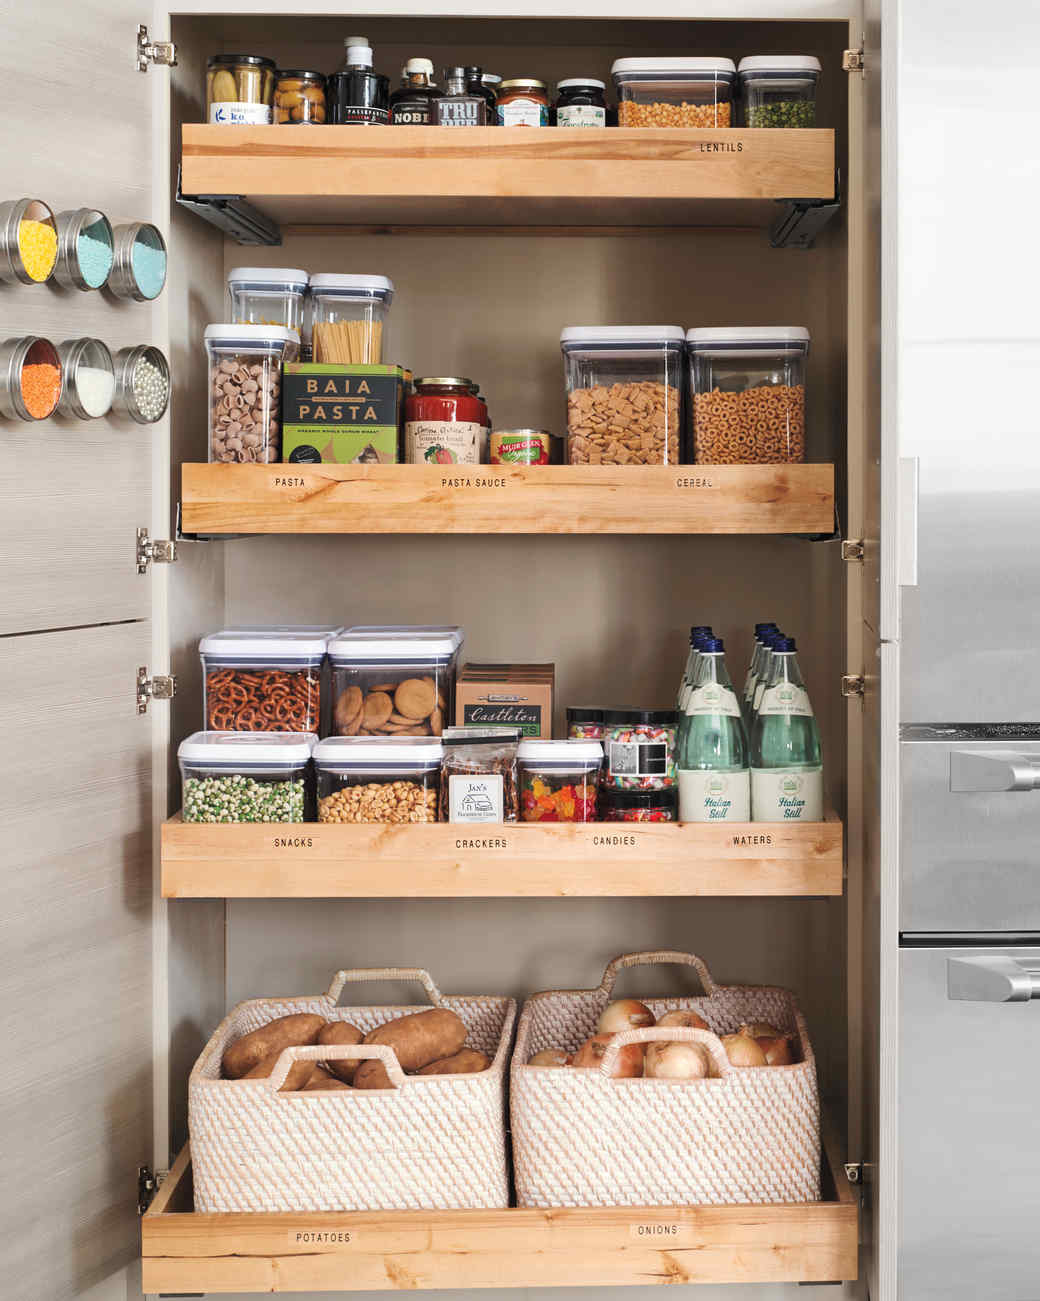 Organize Kitchen Cabinets
 Organize Your Kitchen Cabinets in 11 Easy Steps